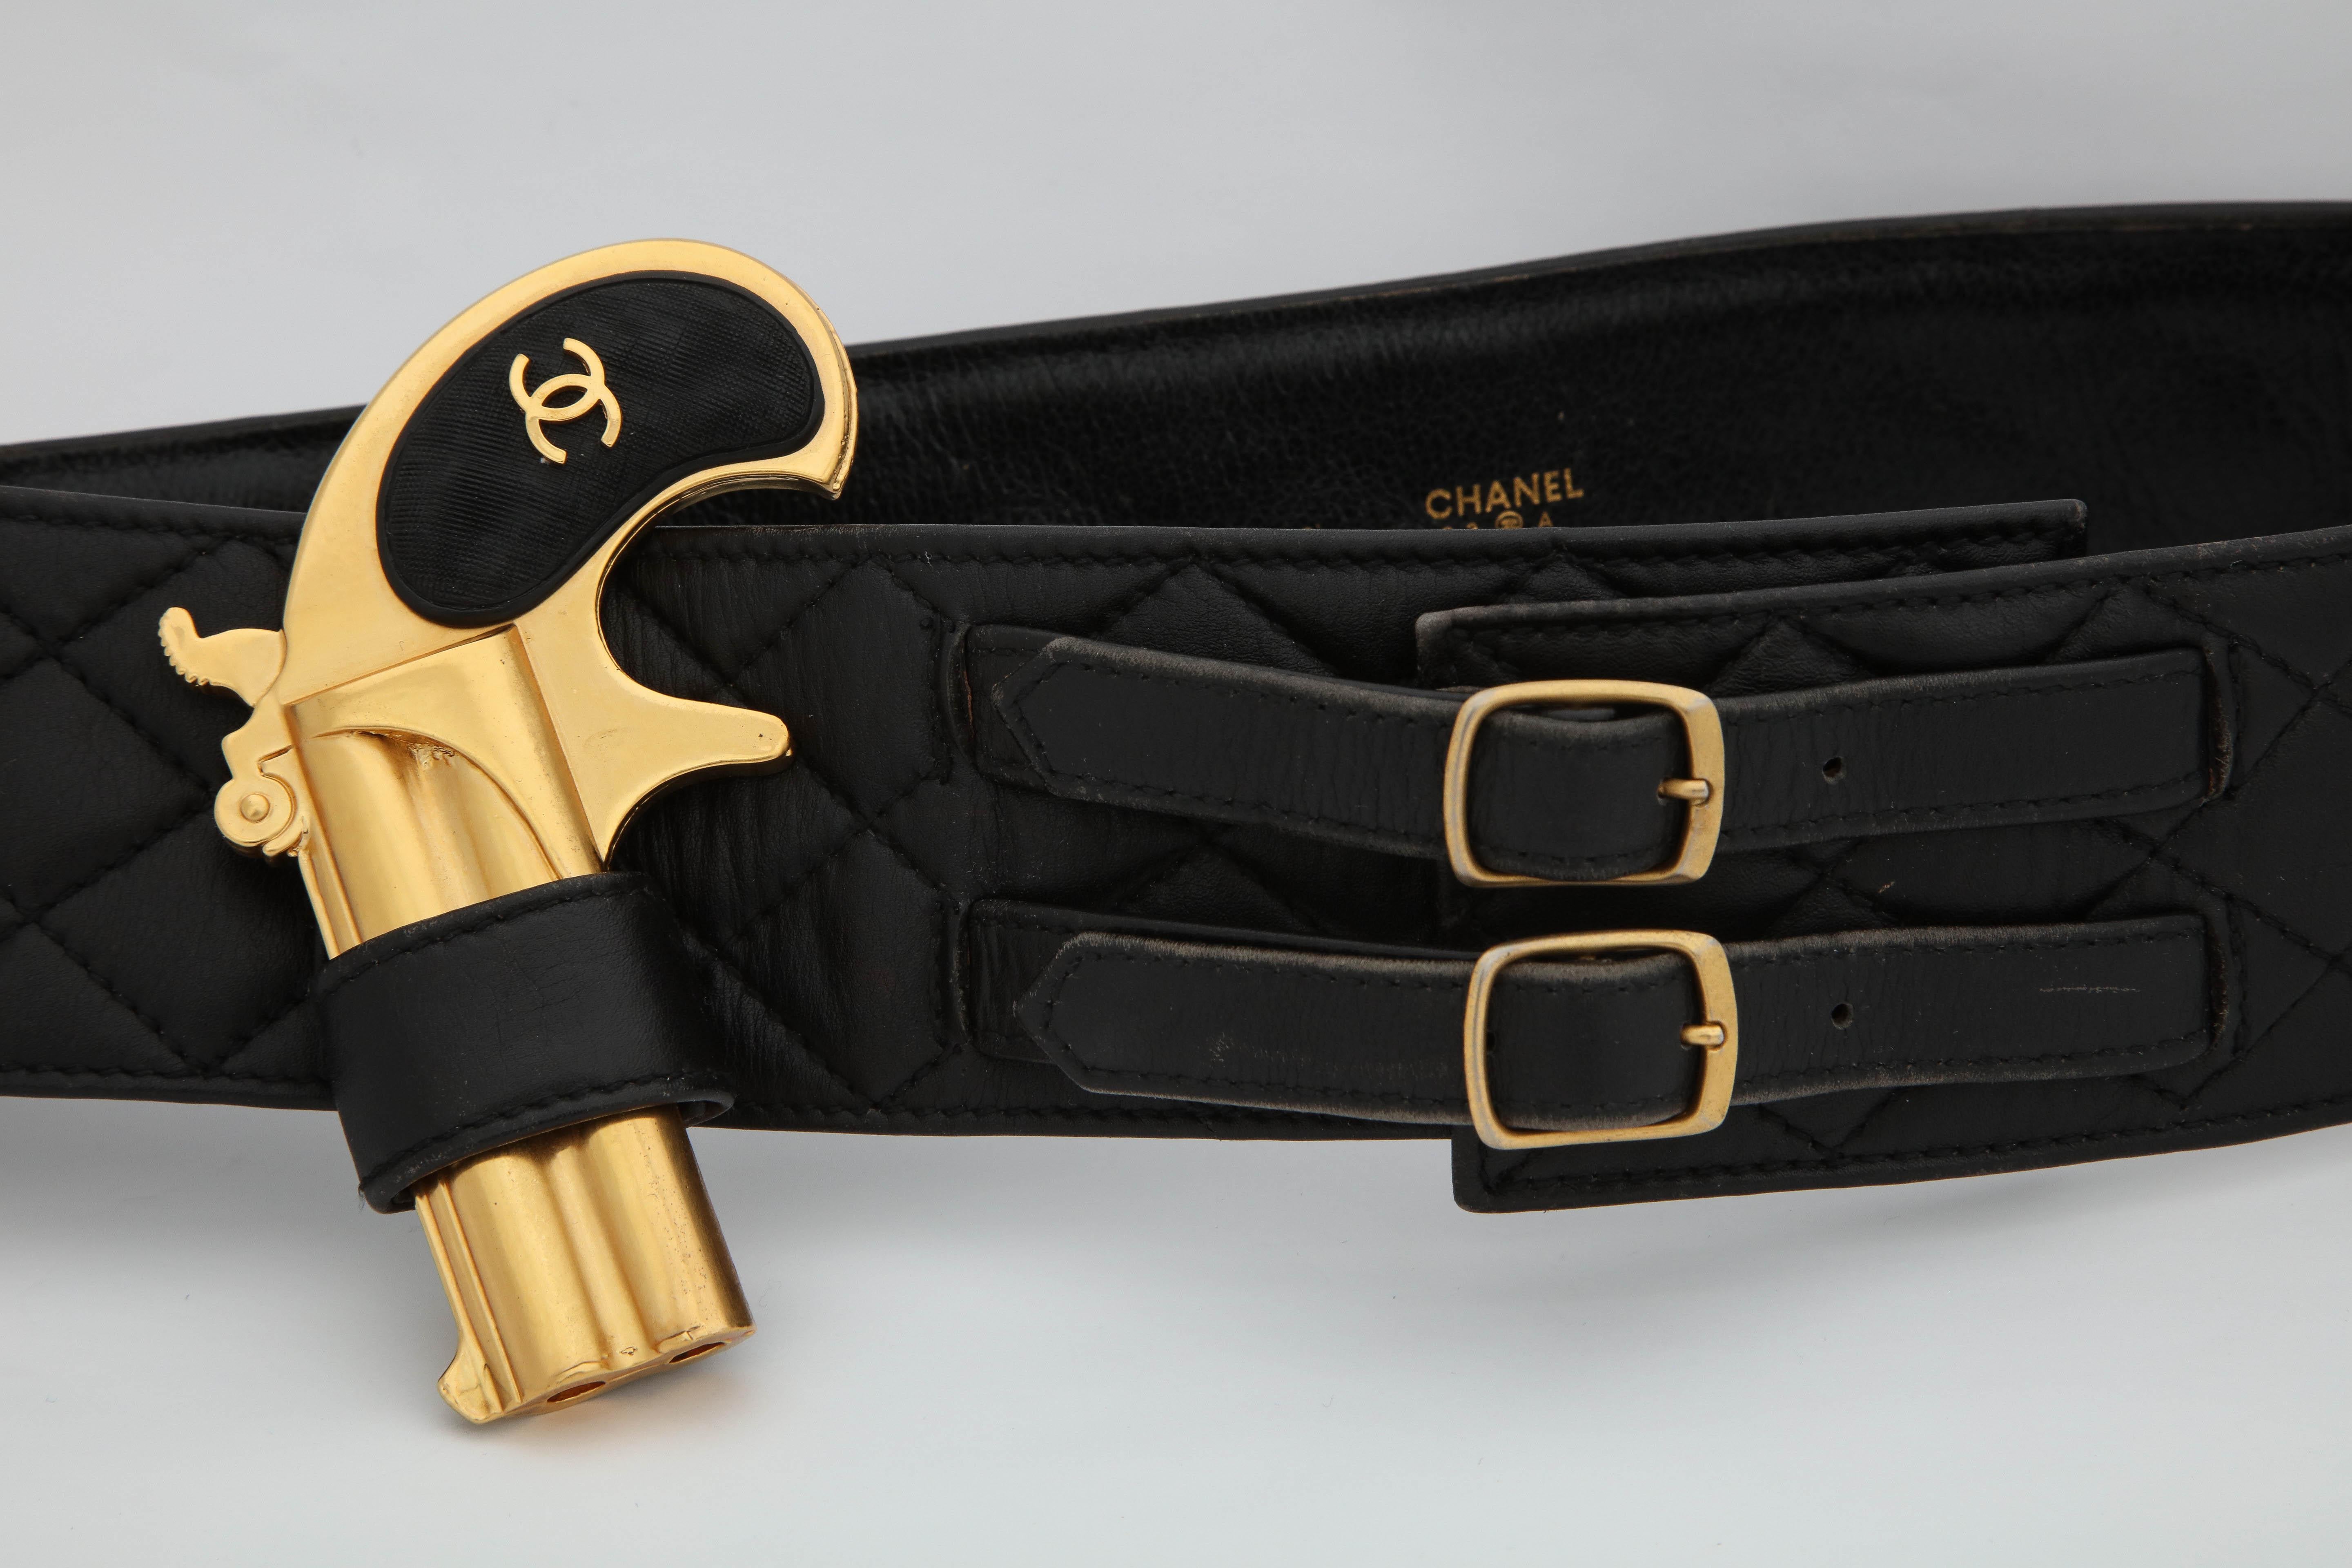 Extremely rare, collectible vintage Chanel leather holster belt with a detouchable gun. Collectors’ item.
From 1993 collection.

Size Waist 90cm